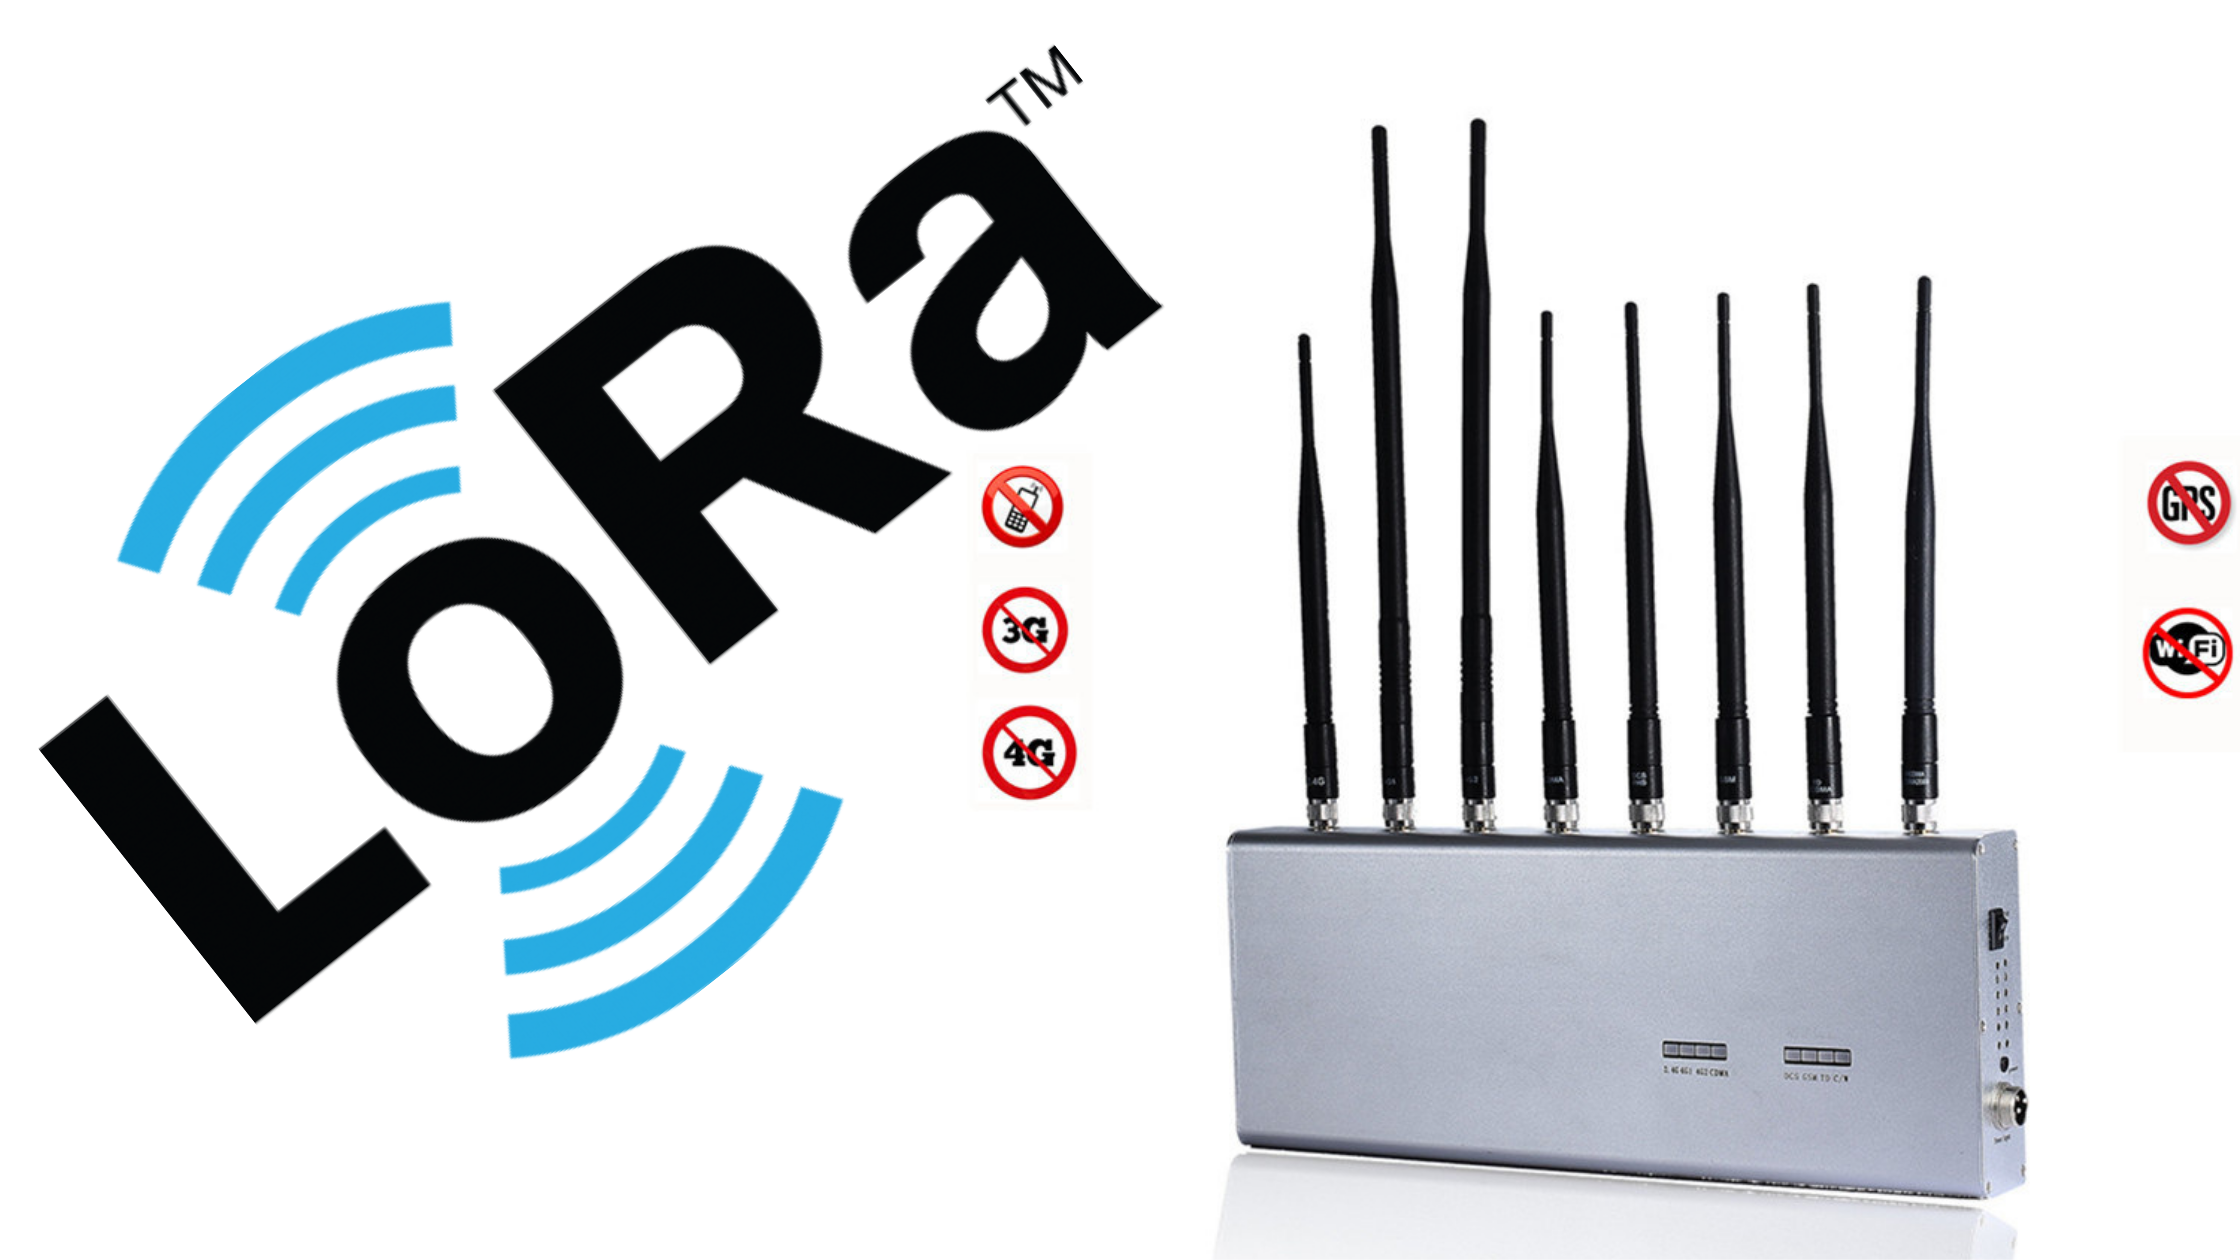 How do LoRa jammers work?